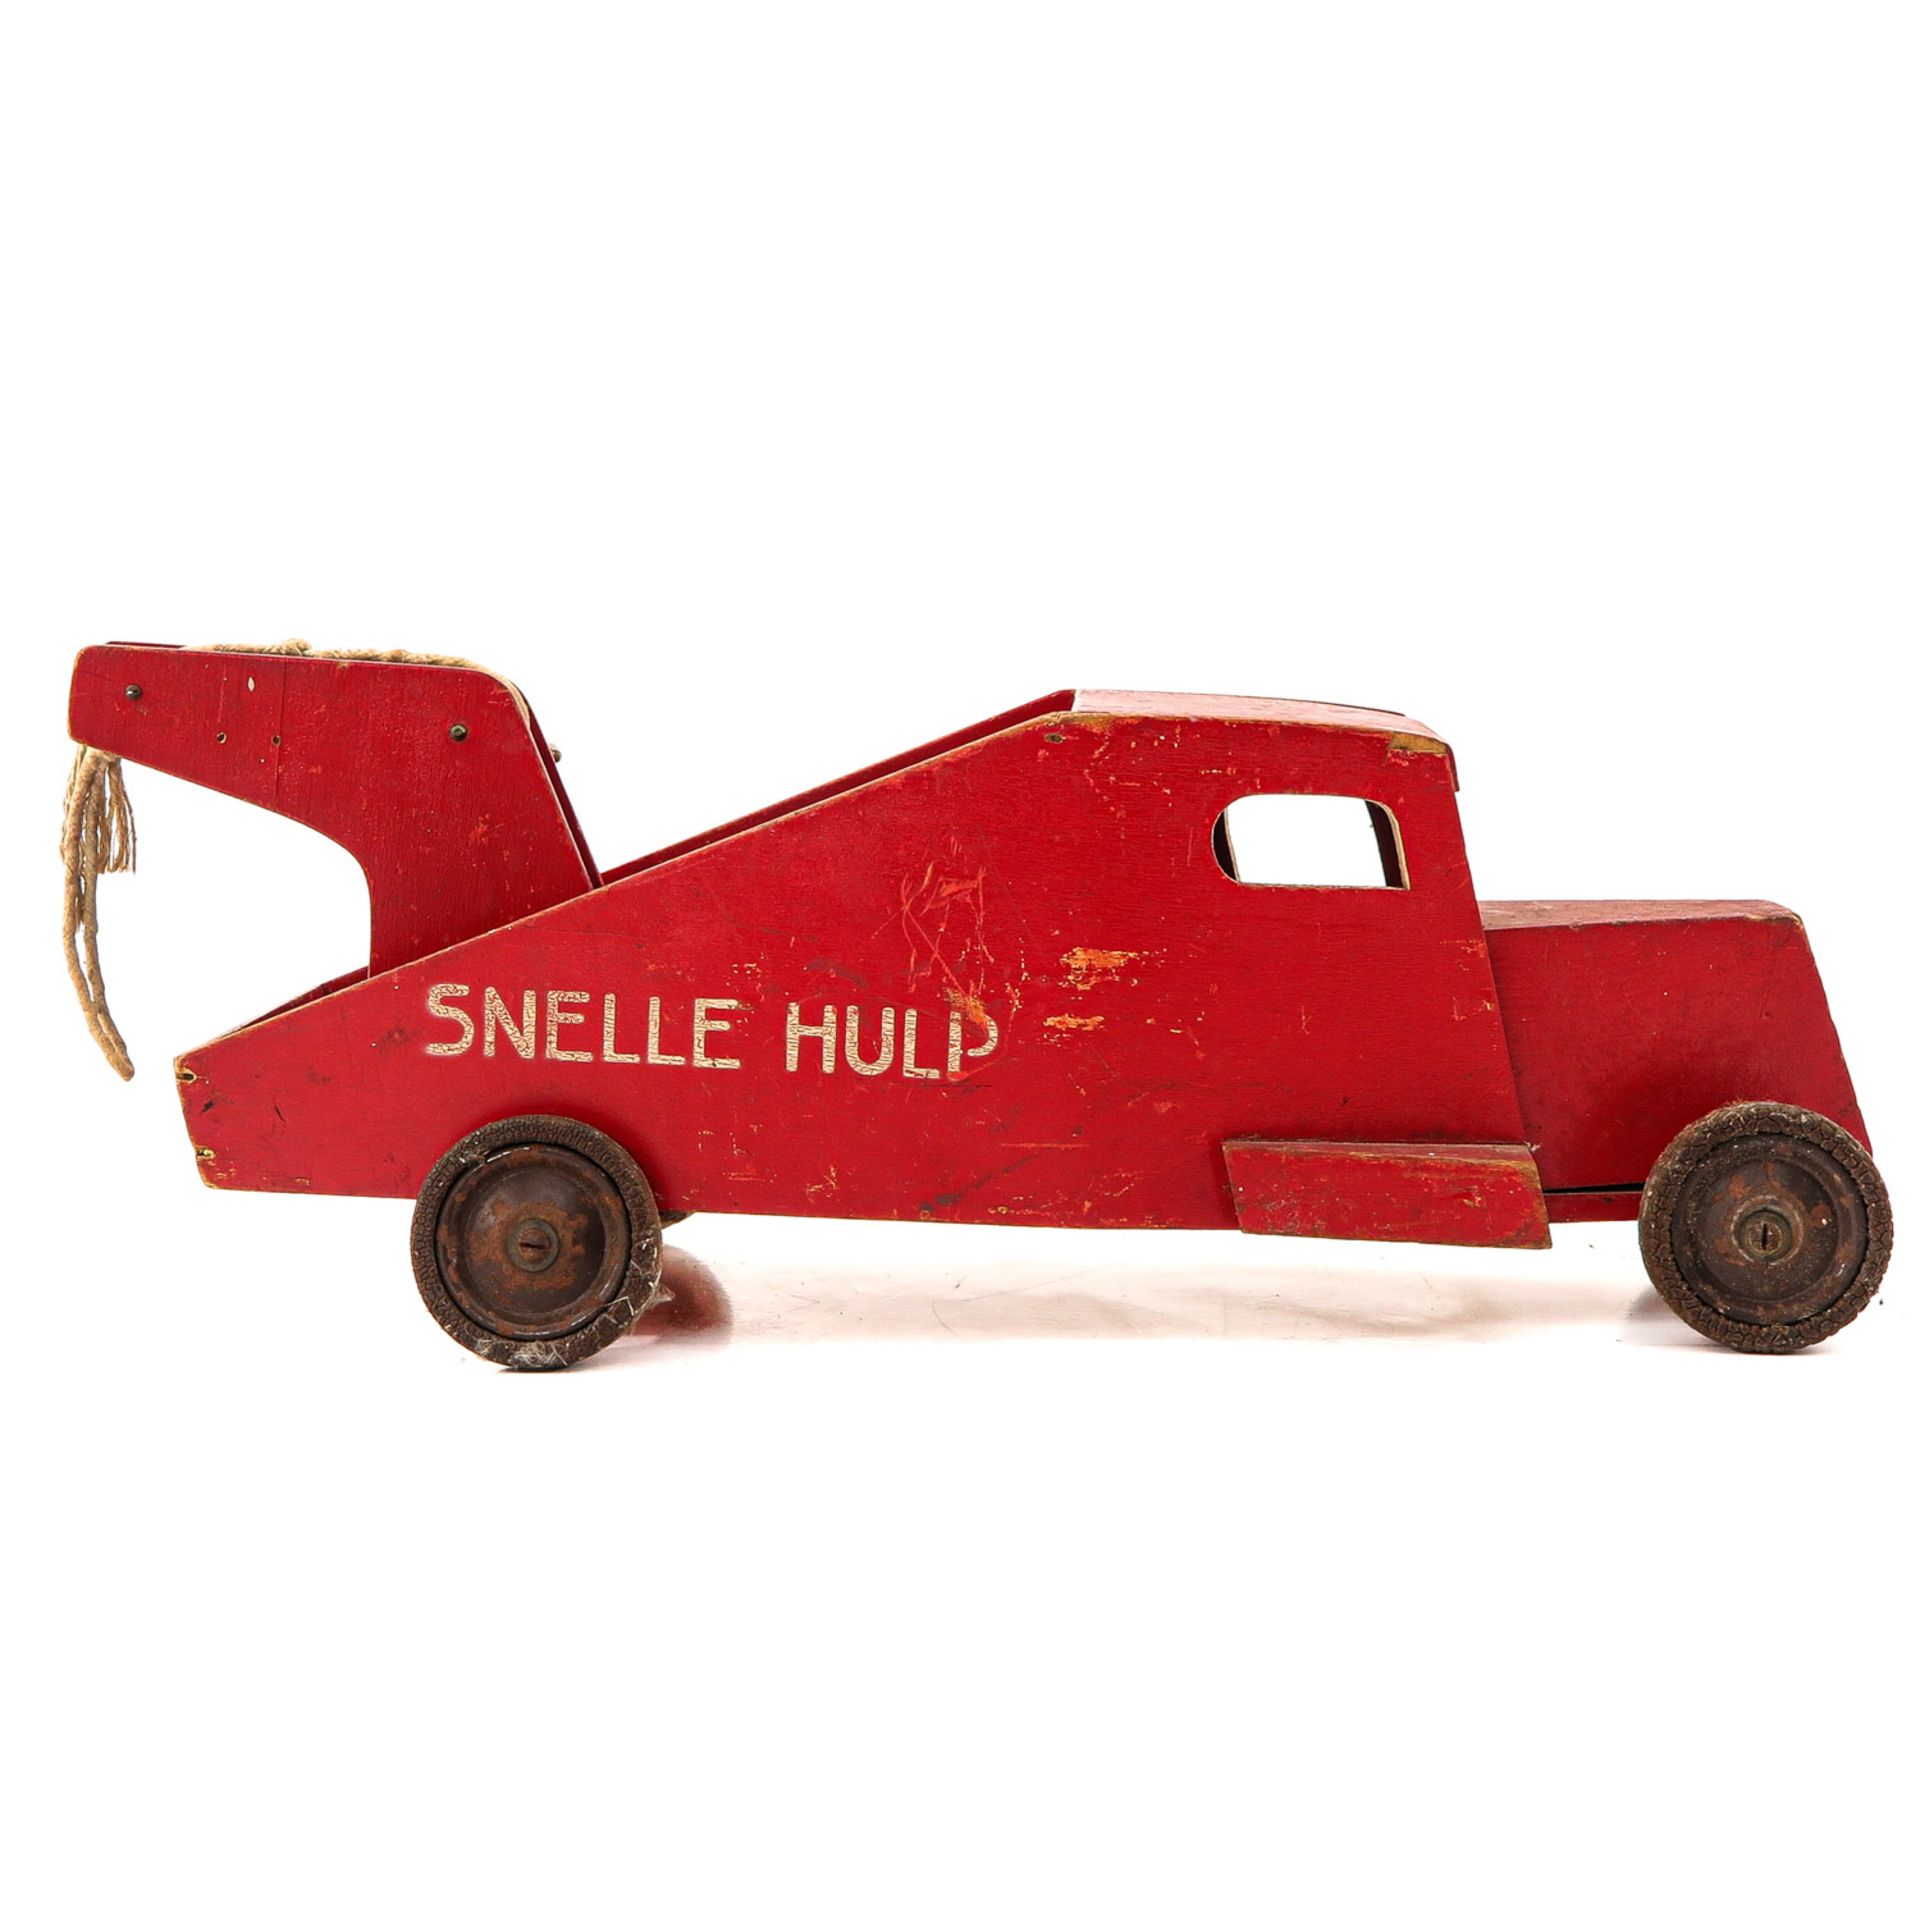 An ADO Wood Toy Truck - Image 3 of 10